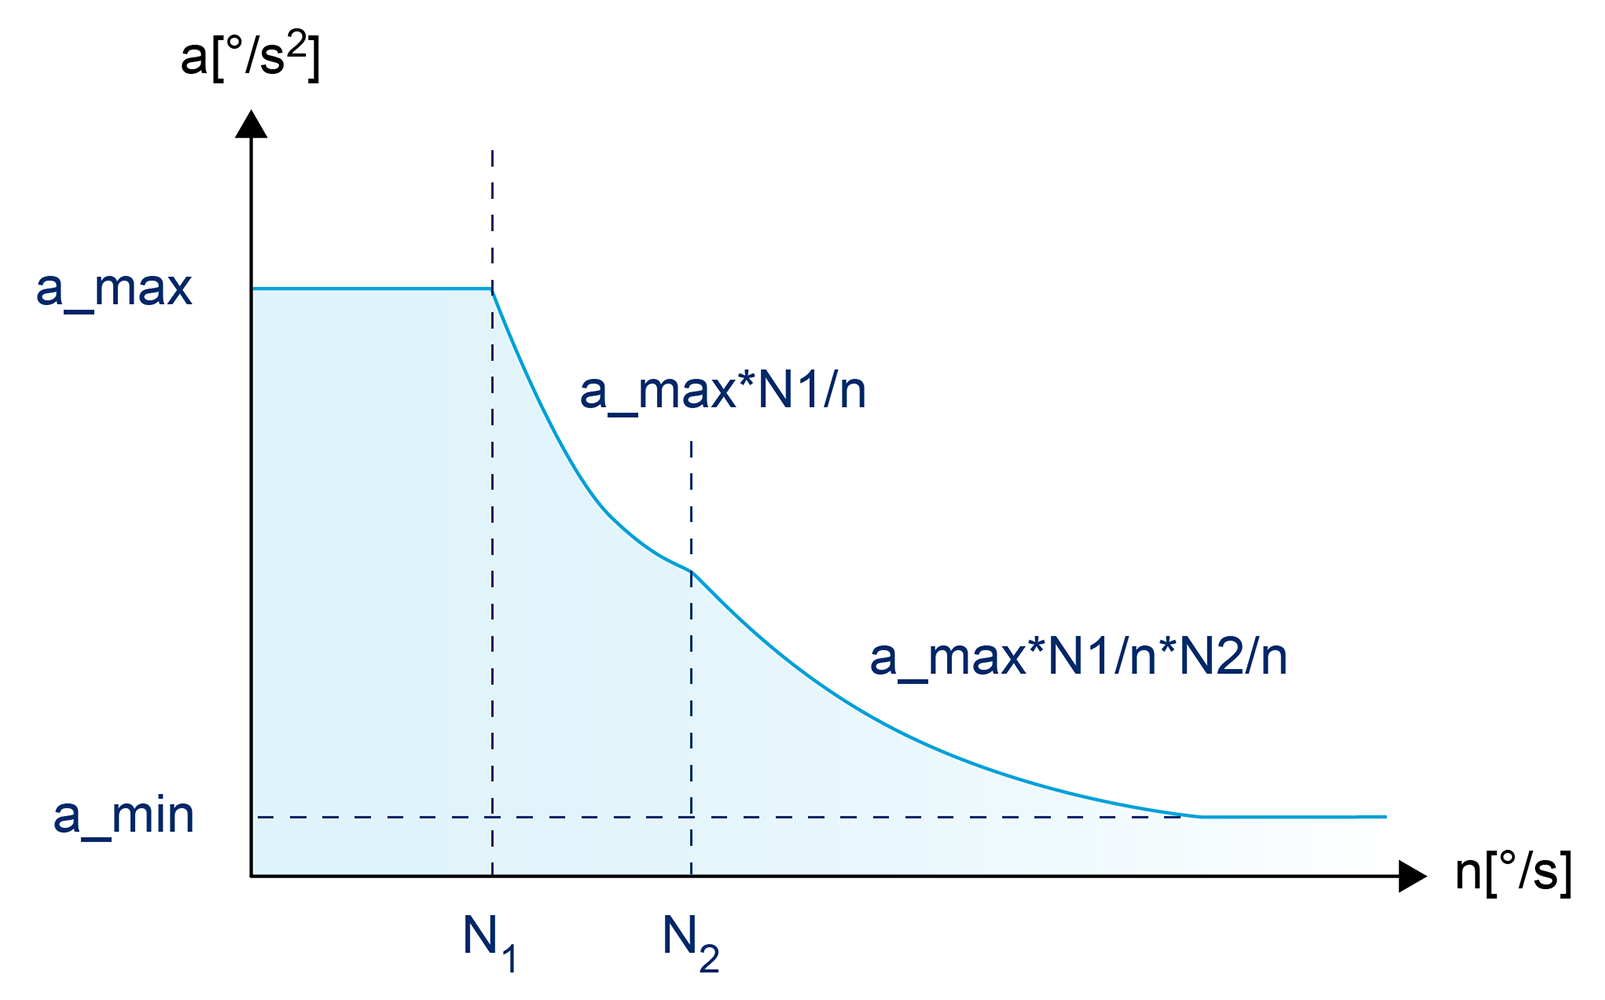 Acceleration profile with asynchronous drive curve